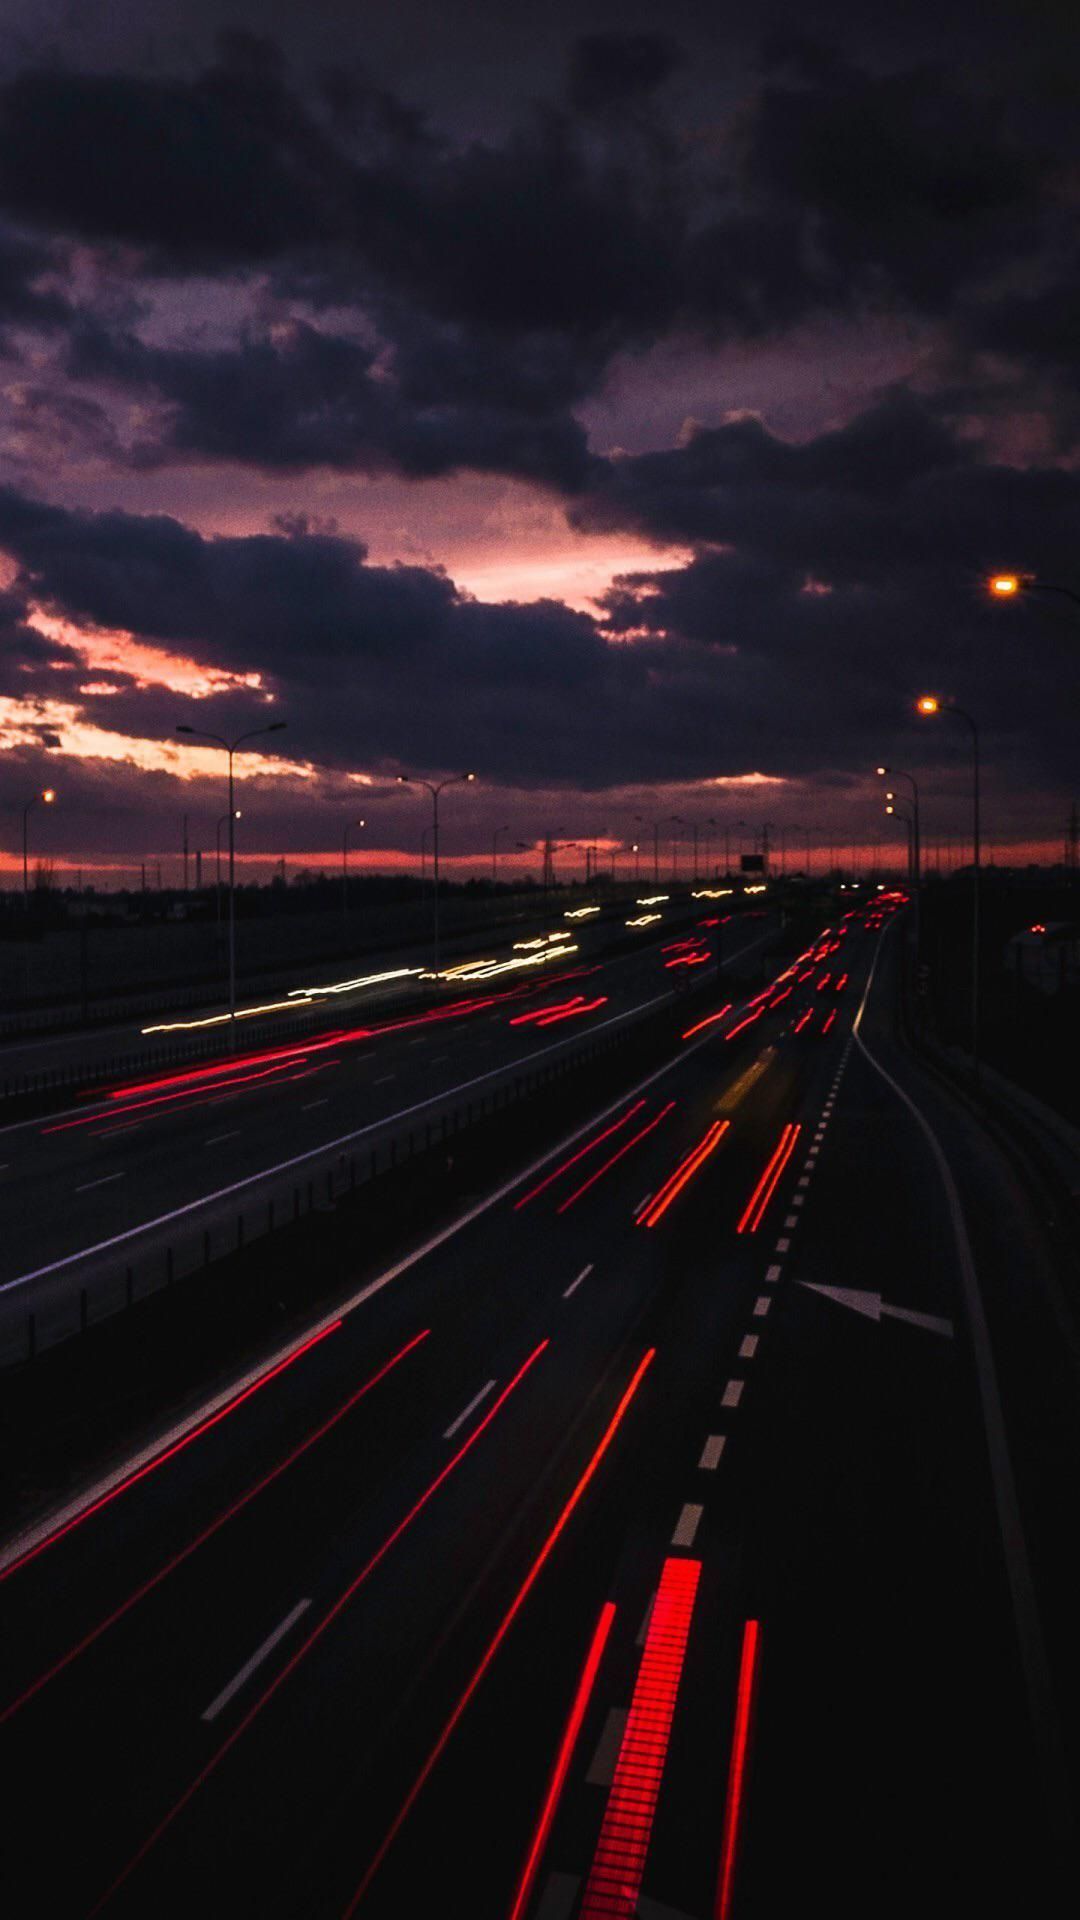 A highway with traffic and lights at night - Road